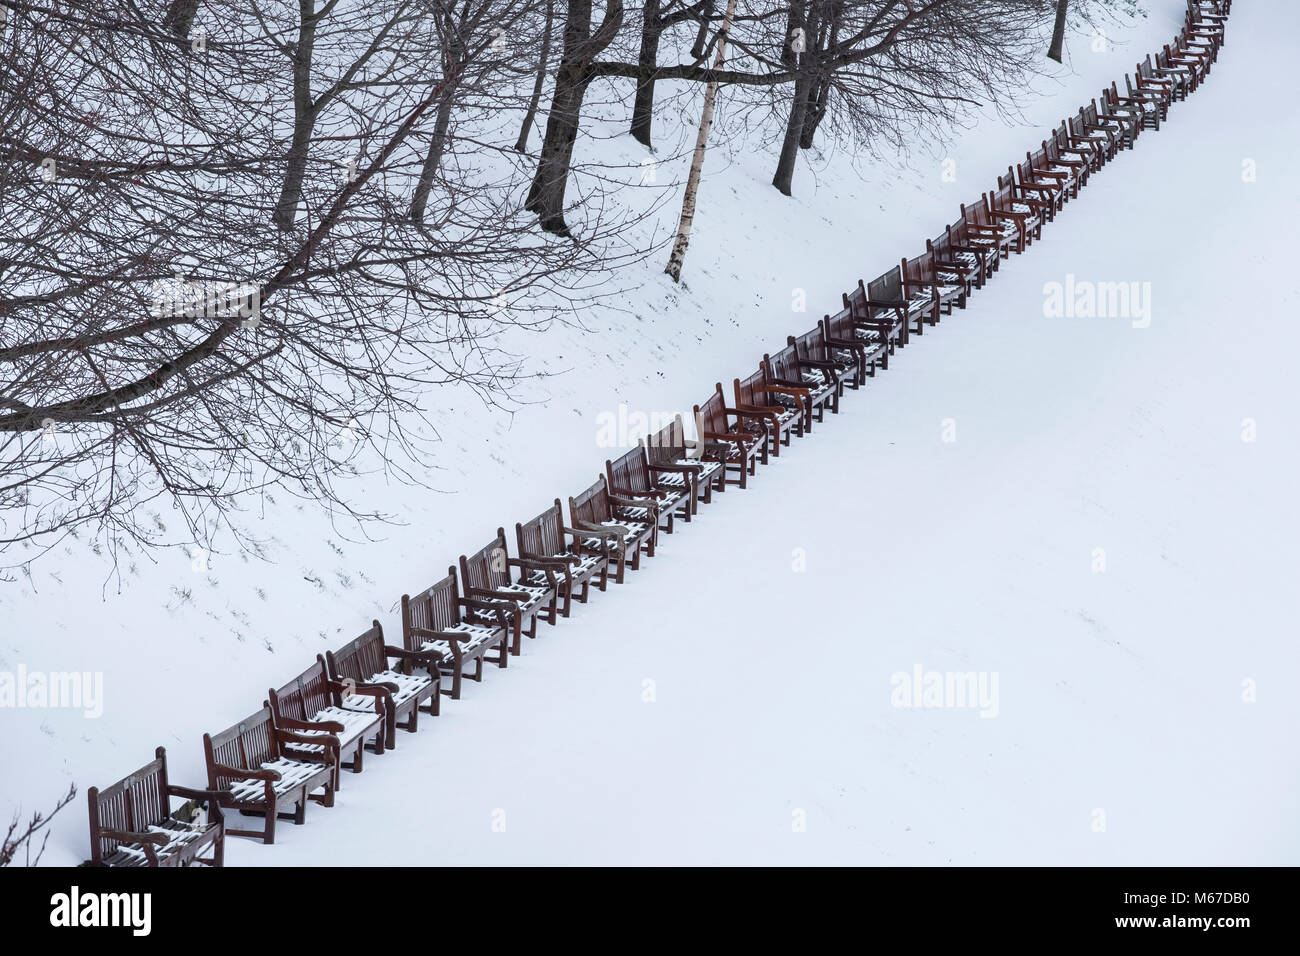 Edinburgh, Scotland, United Kingdom, 1 March, 2018. Heavy snowfalls continue across the city from the storm known as The Beast from the East. Most shops are closed and transport services have been cancelled. Pictured; Princes Street Gardens closed to the public leaving snow pristine. A row of park benches lie empty. Credit: Iain Masterton/Alamy Live News Stock Photo